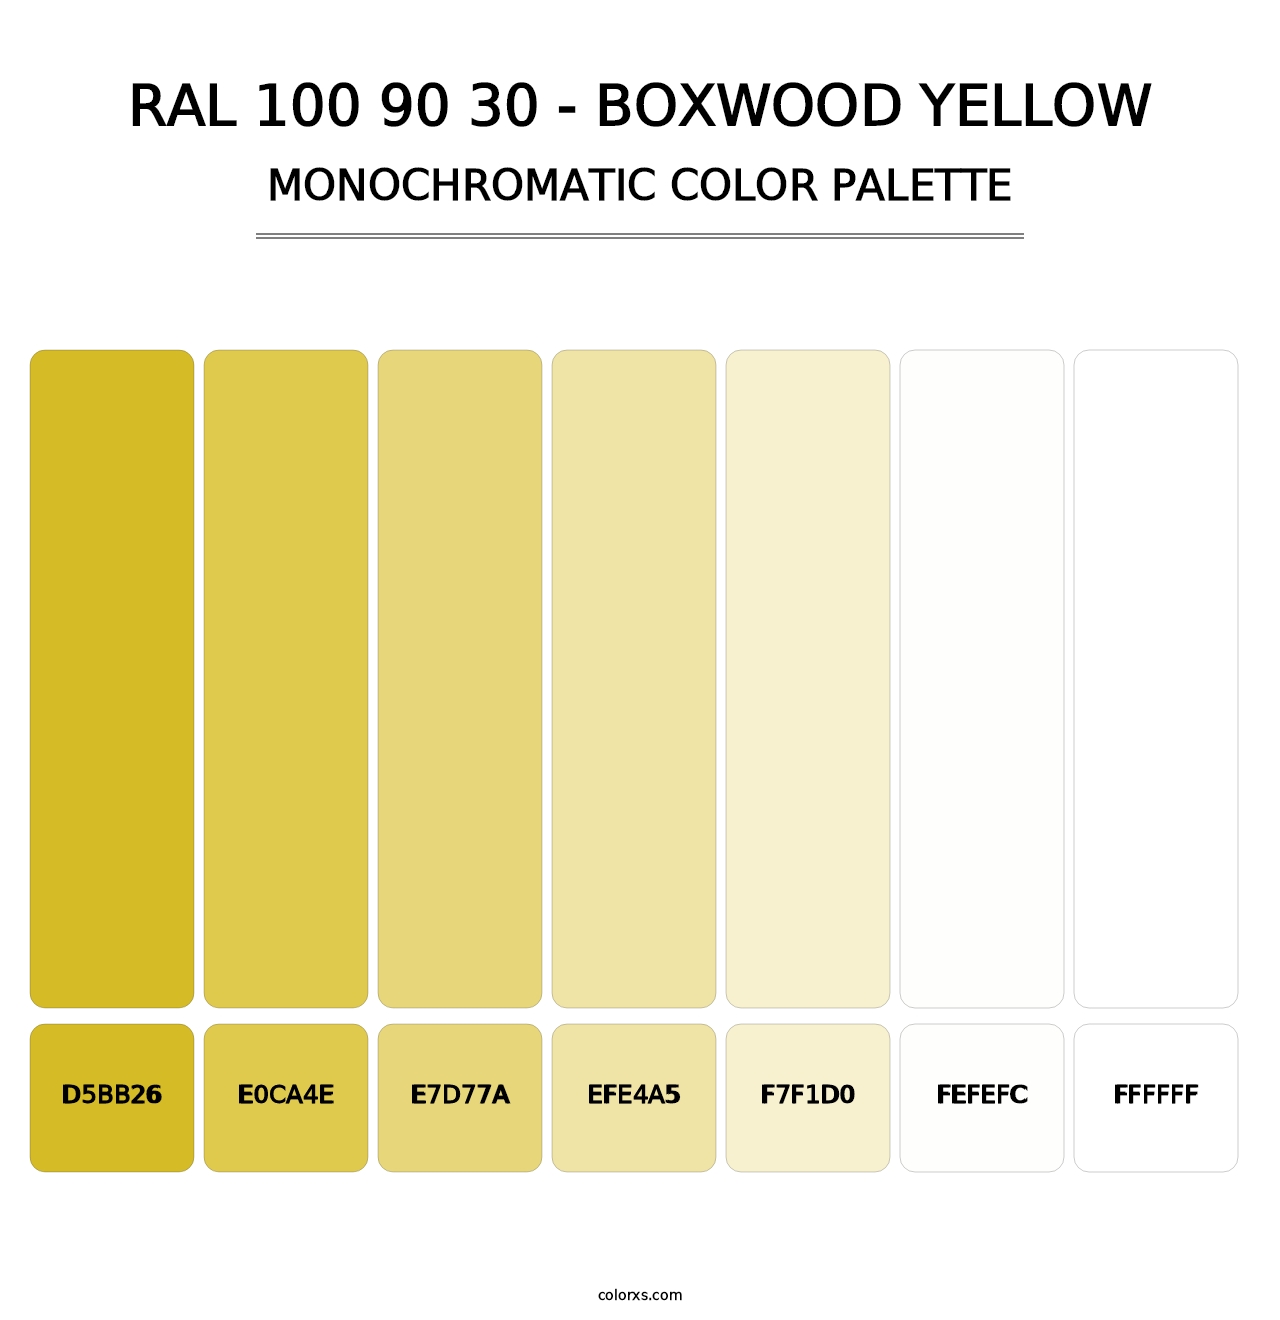 RAL 100 90 30 - Boxwood Yellow - Monochromatic Color Palette